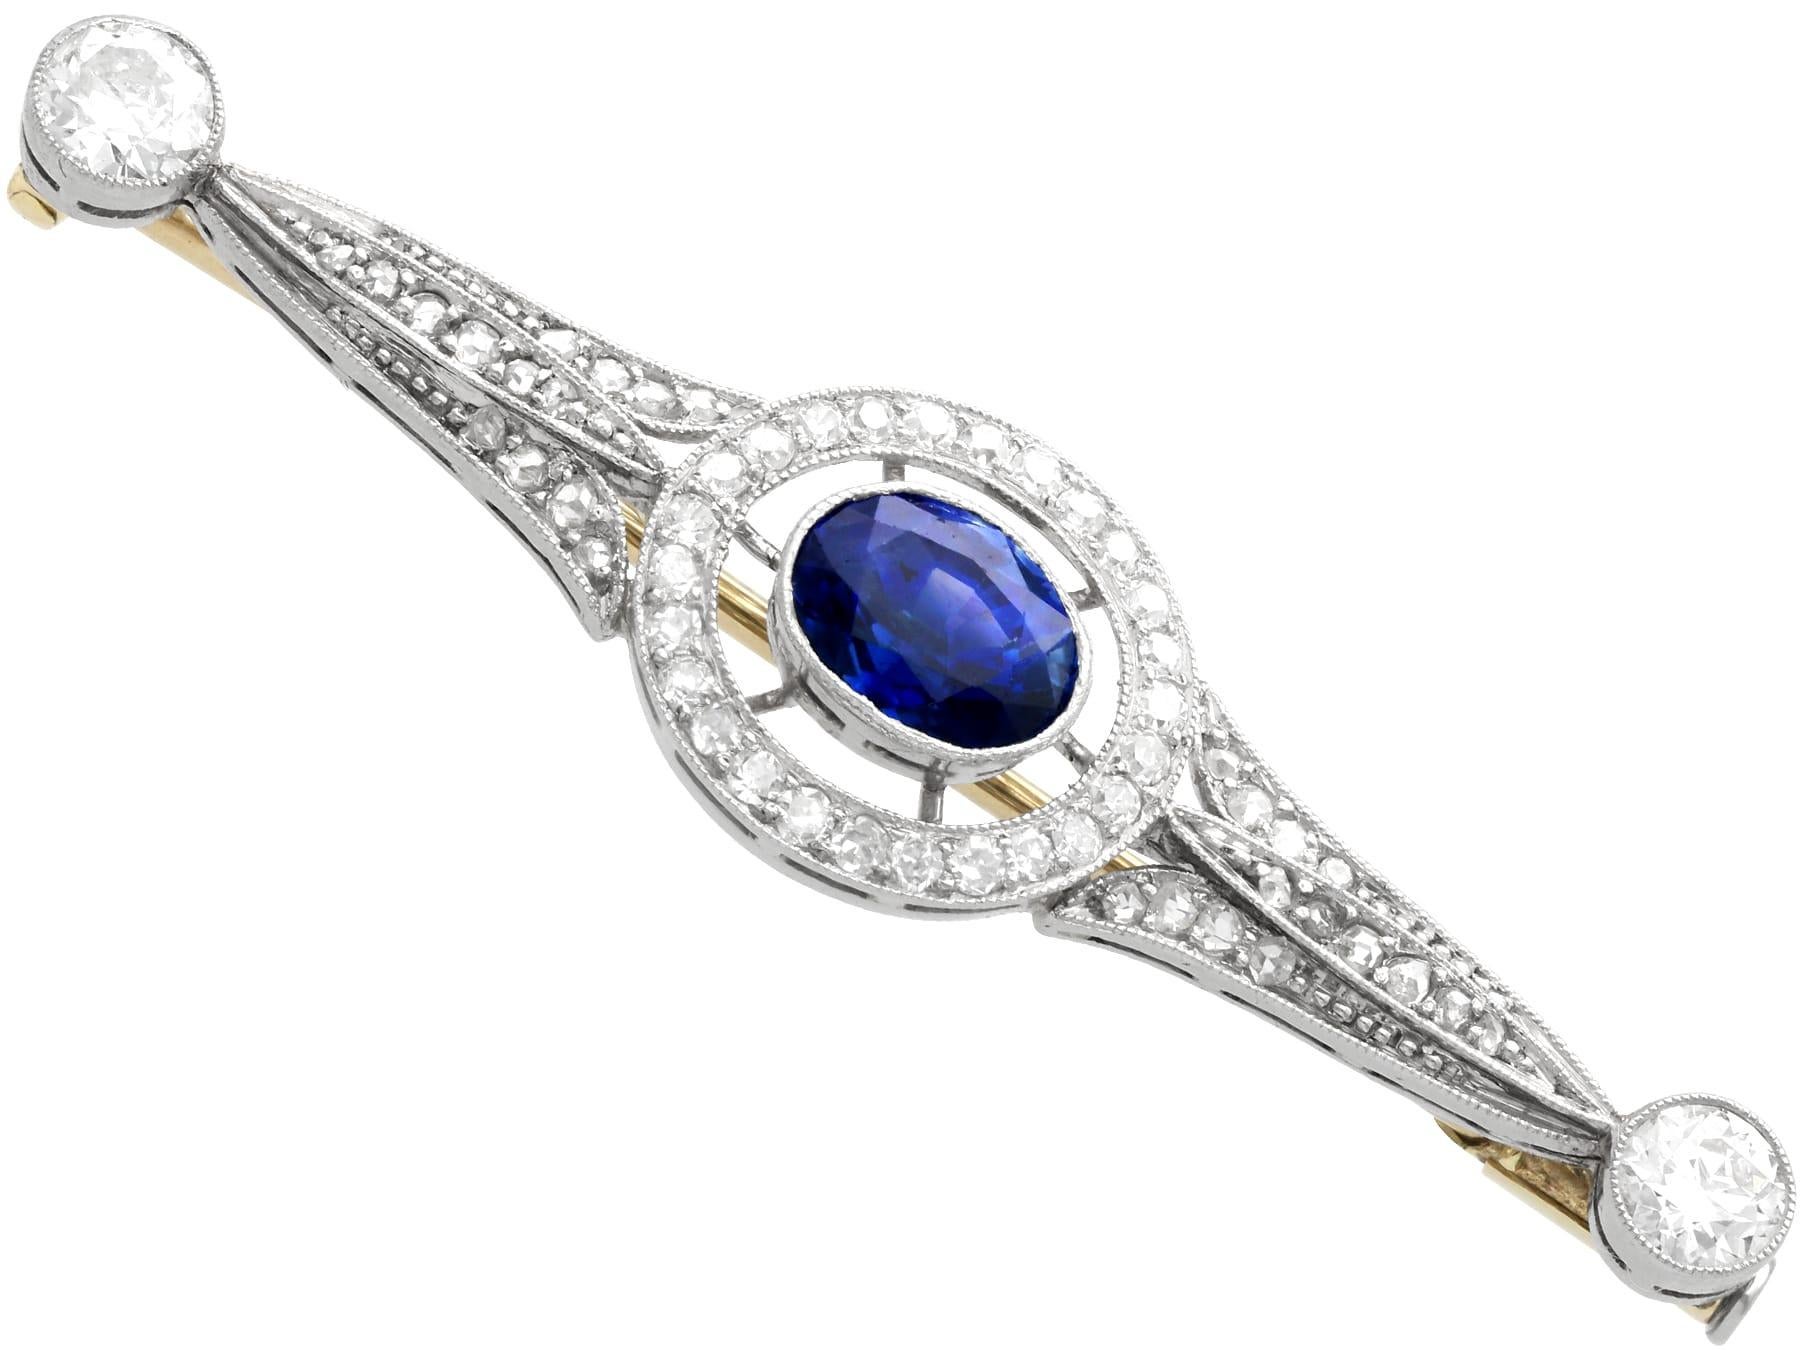 Antique 1.25Ct Sapphire 2.34Ct Diamond and Platinum Brooch Circa 1925 In Excellent Condition For Sale In Jesmond, Newcastle Upon Tyne